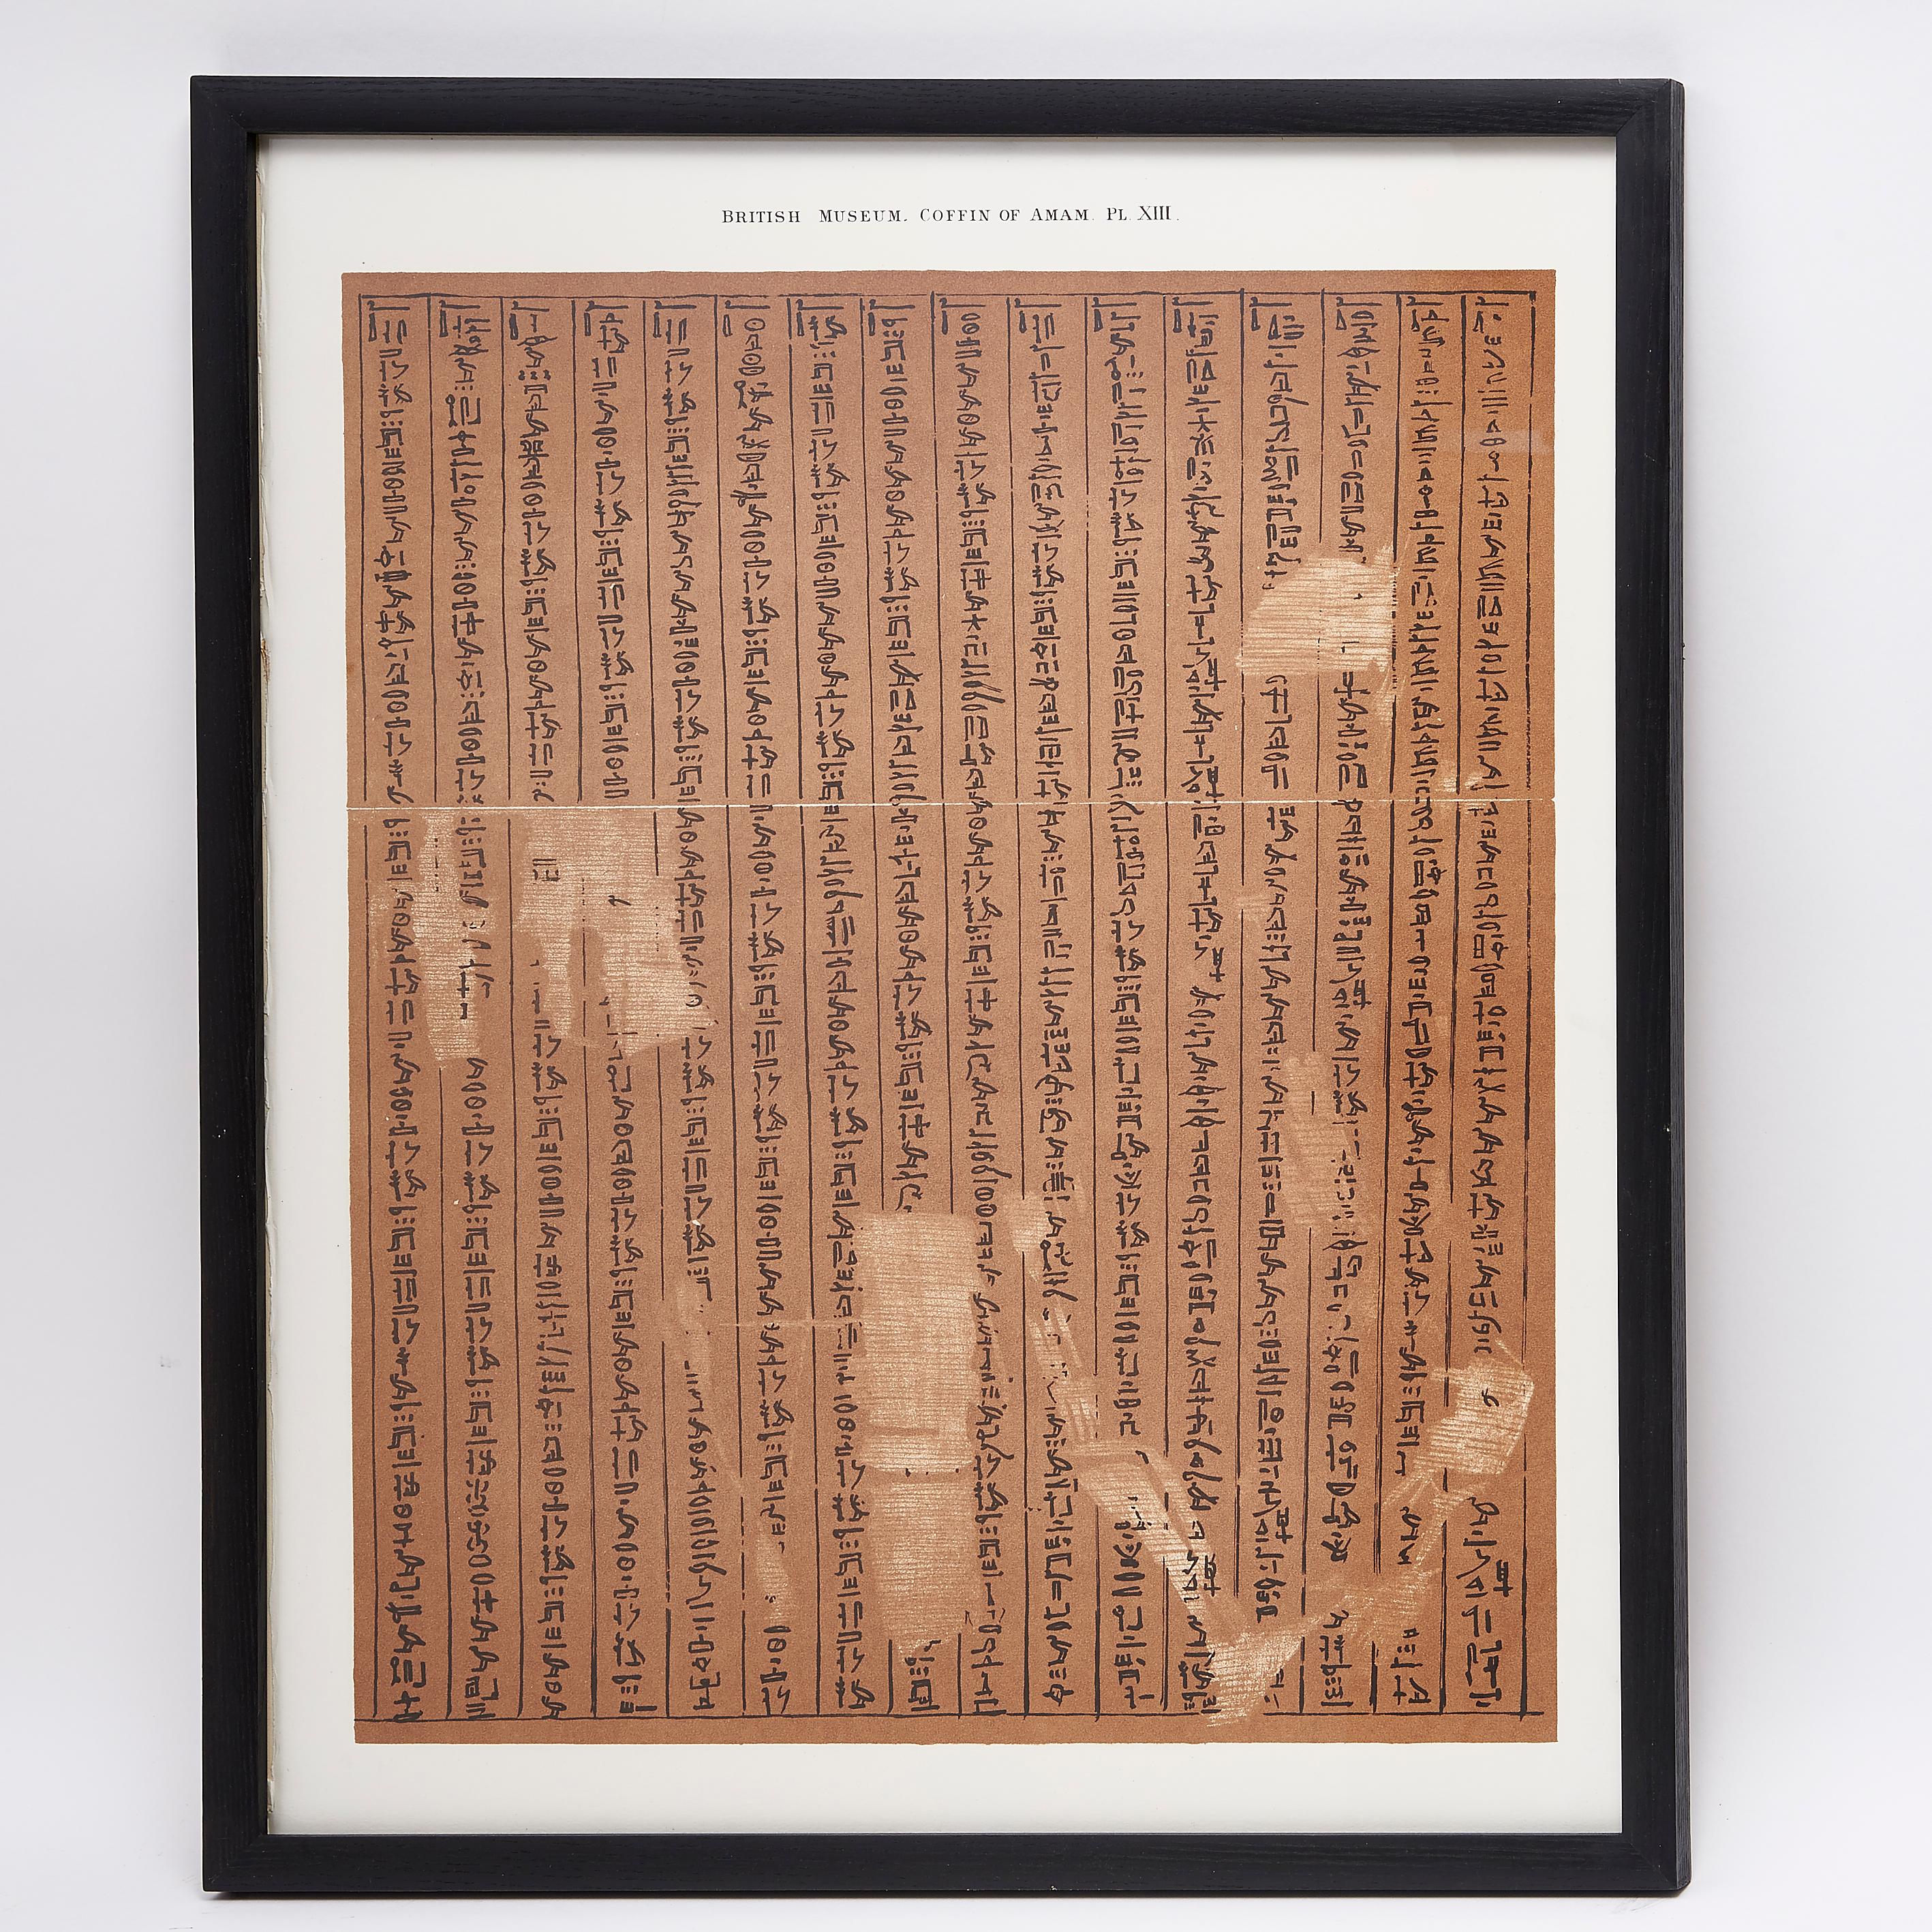 A set of four prints, in later black frames, featuring Ancient Egyptian hieroglyphics from the coffin of Amamu (an official in Ancient Egyptian Empire), British Museum circa 1886, published by the order of the trustees. The prints consisting of